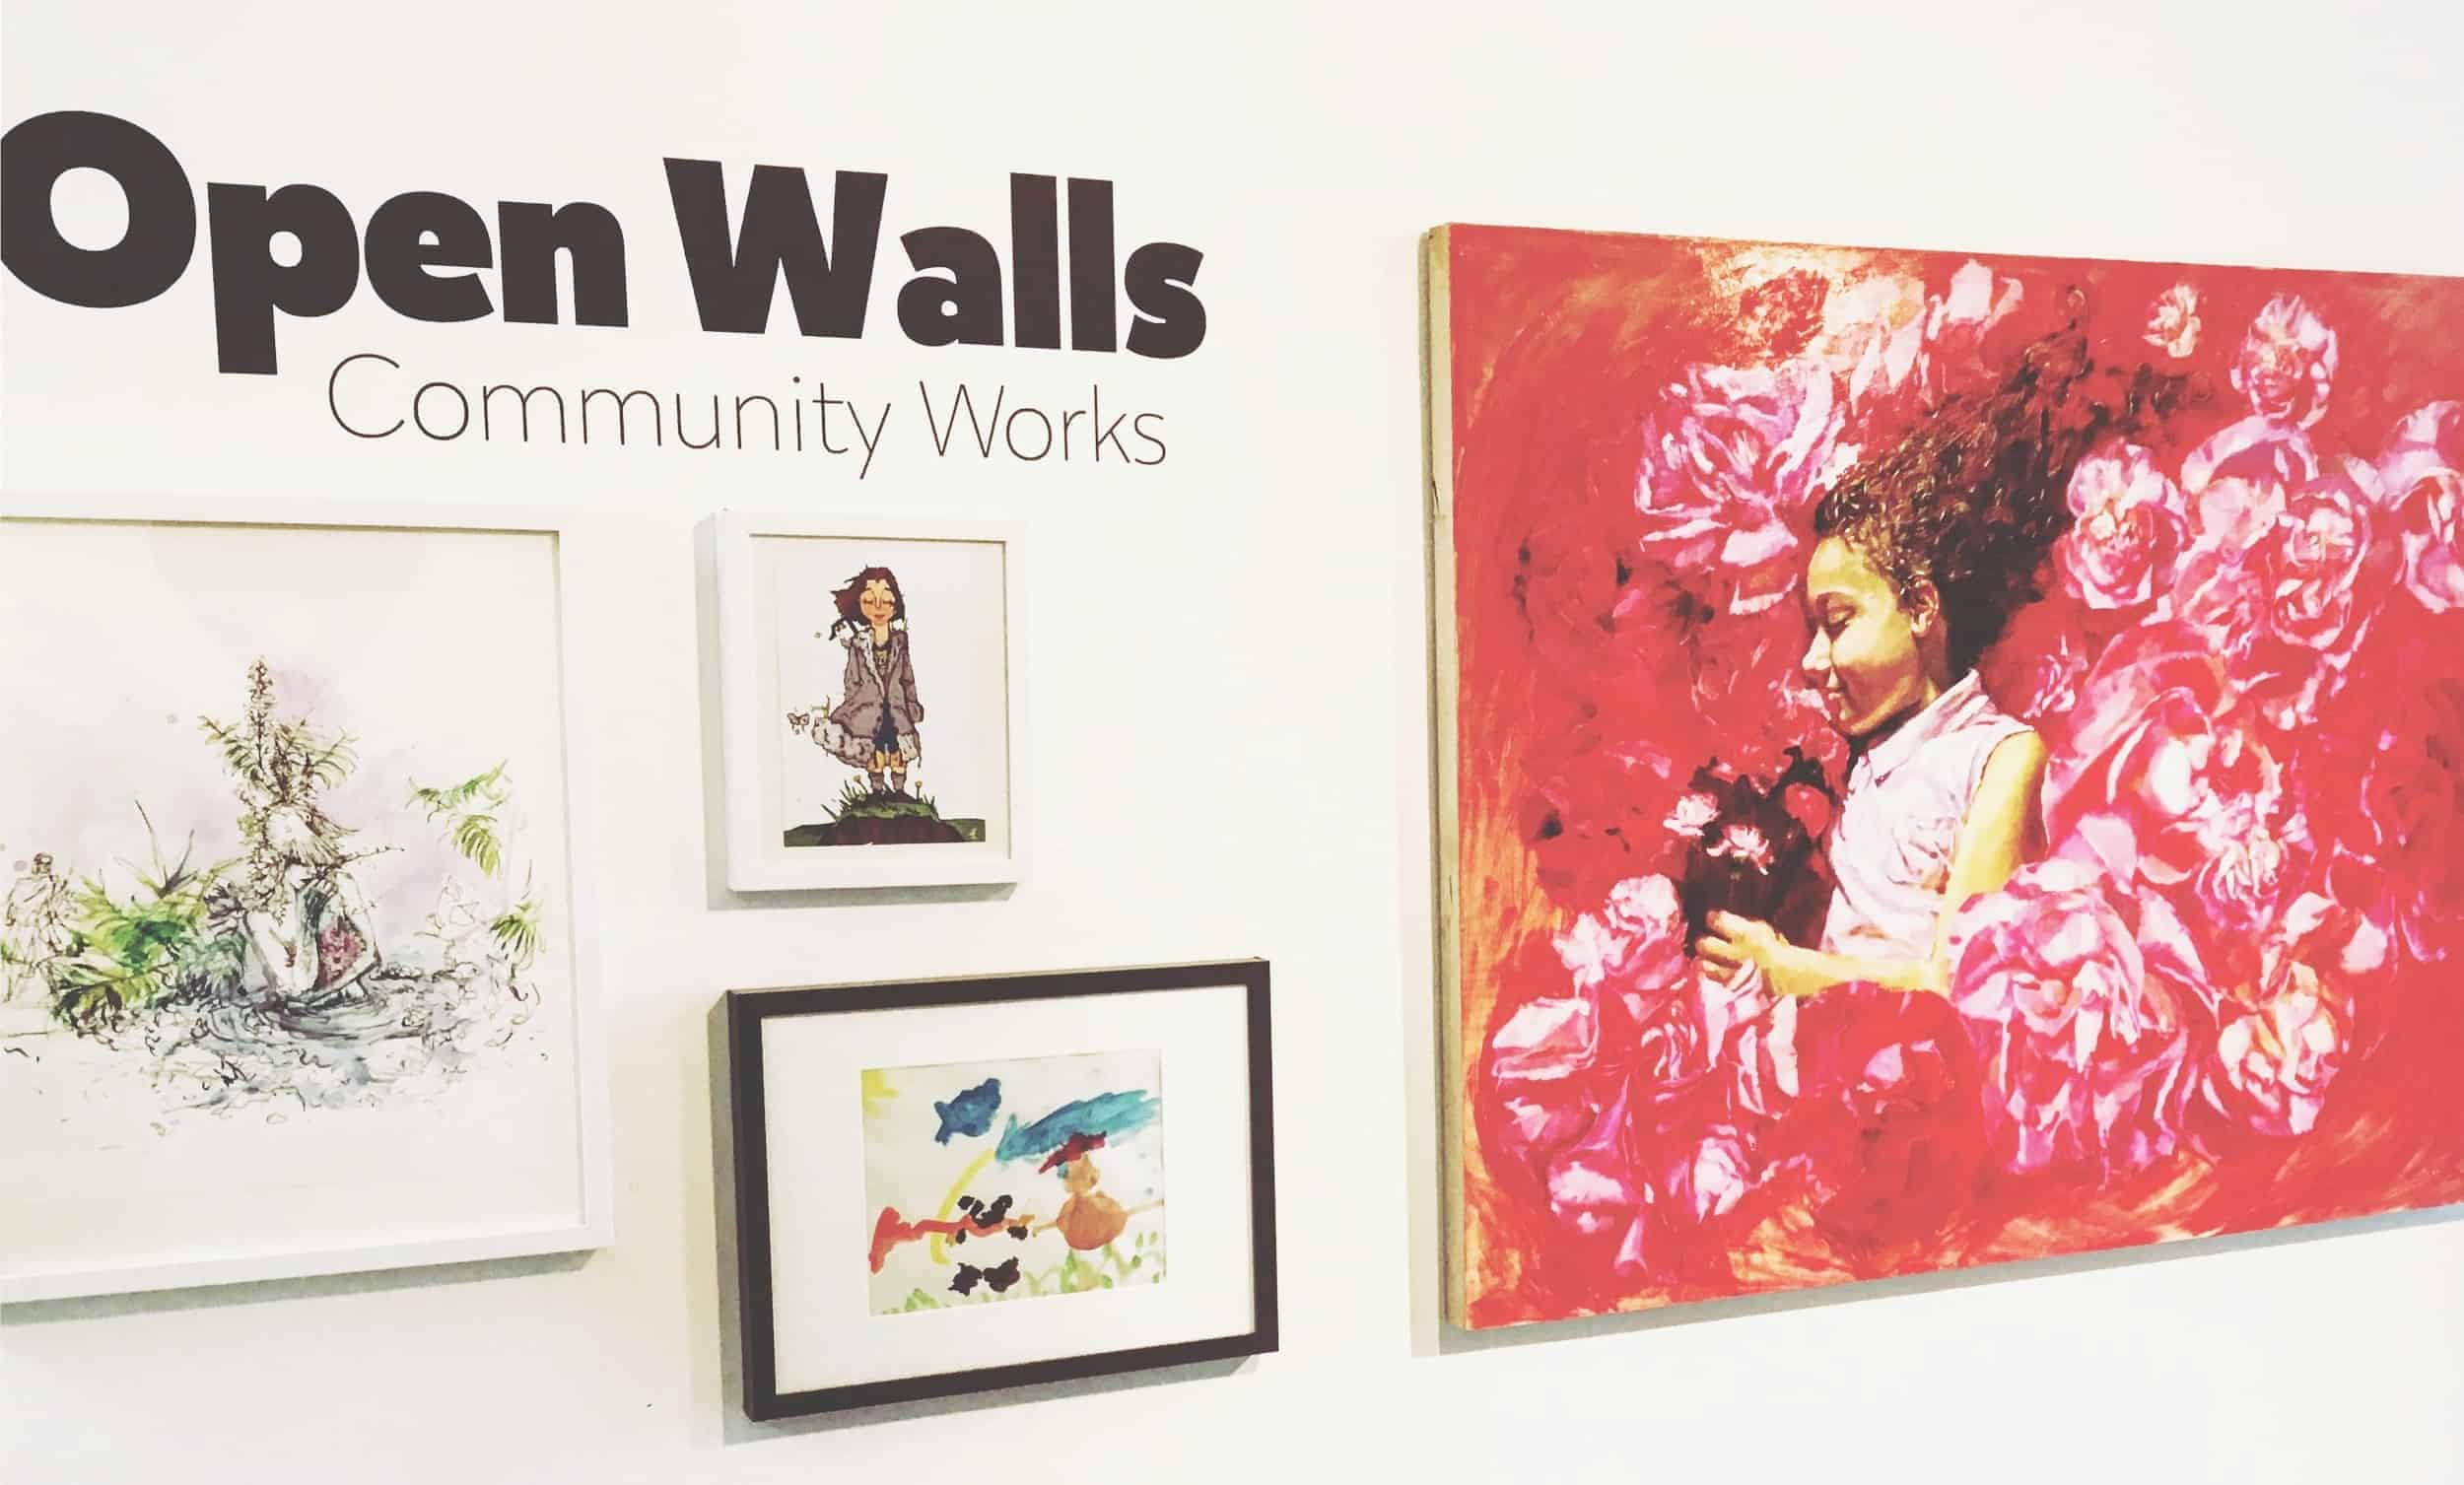 Open Walls encourages artists to submit art